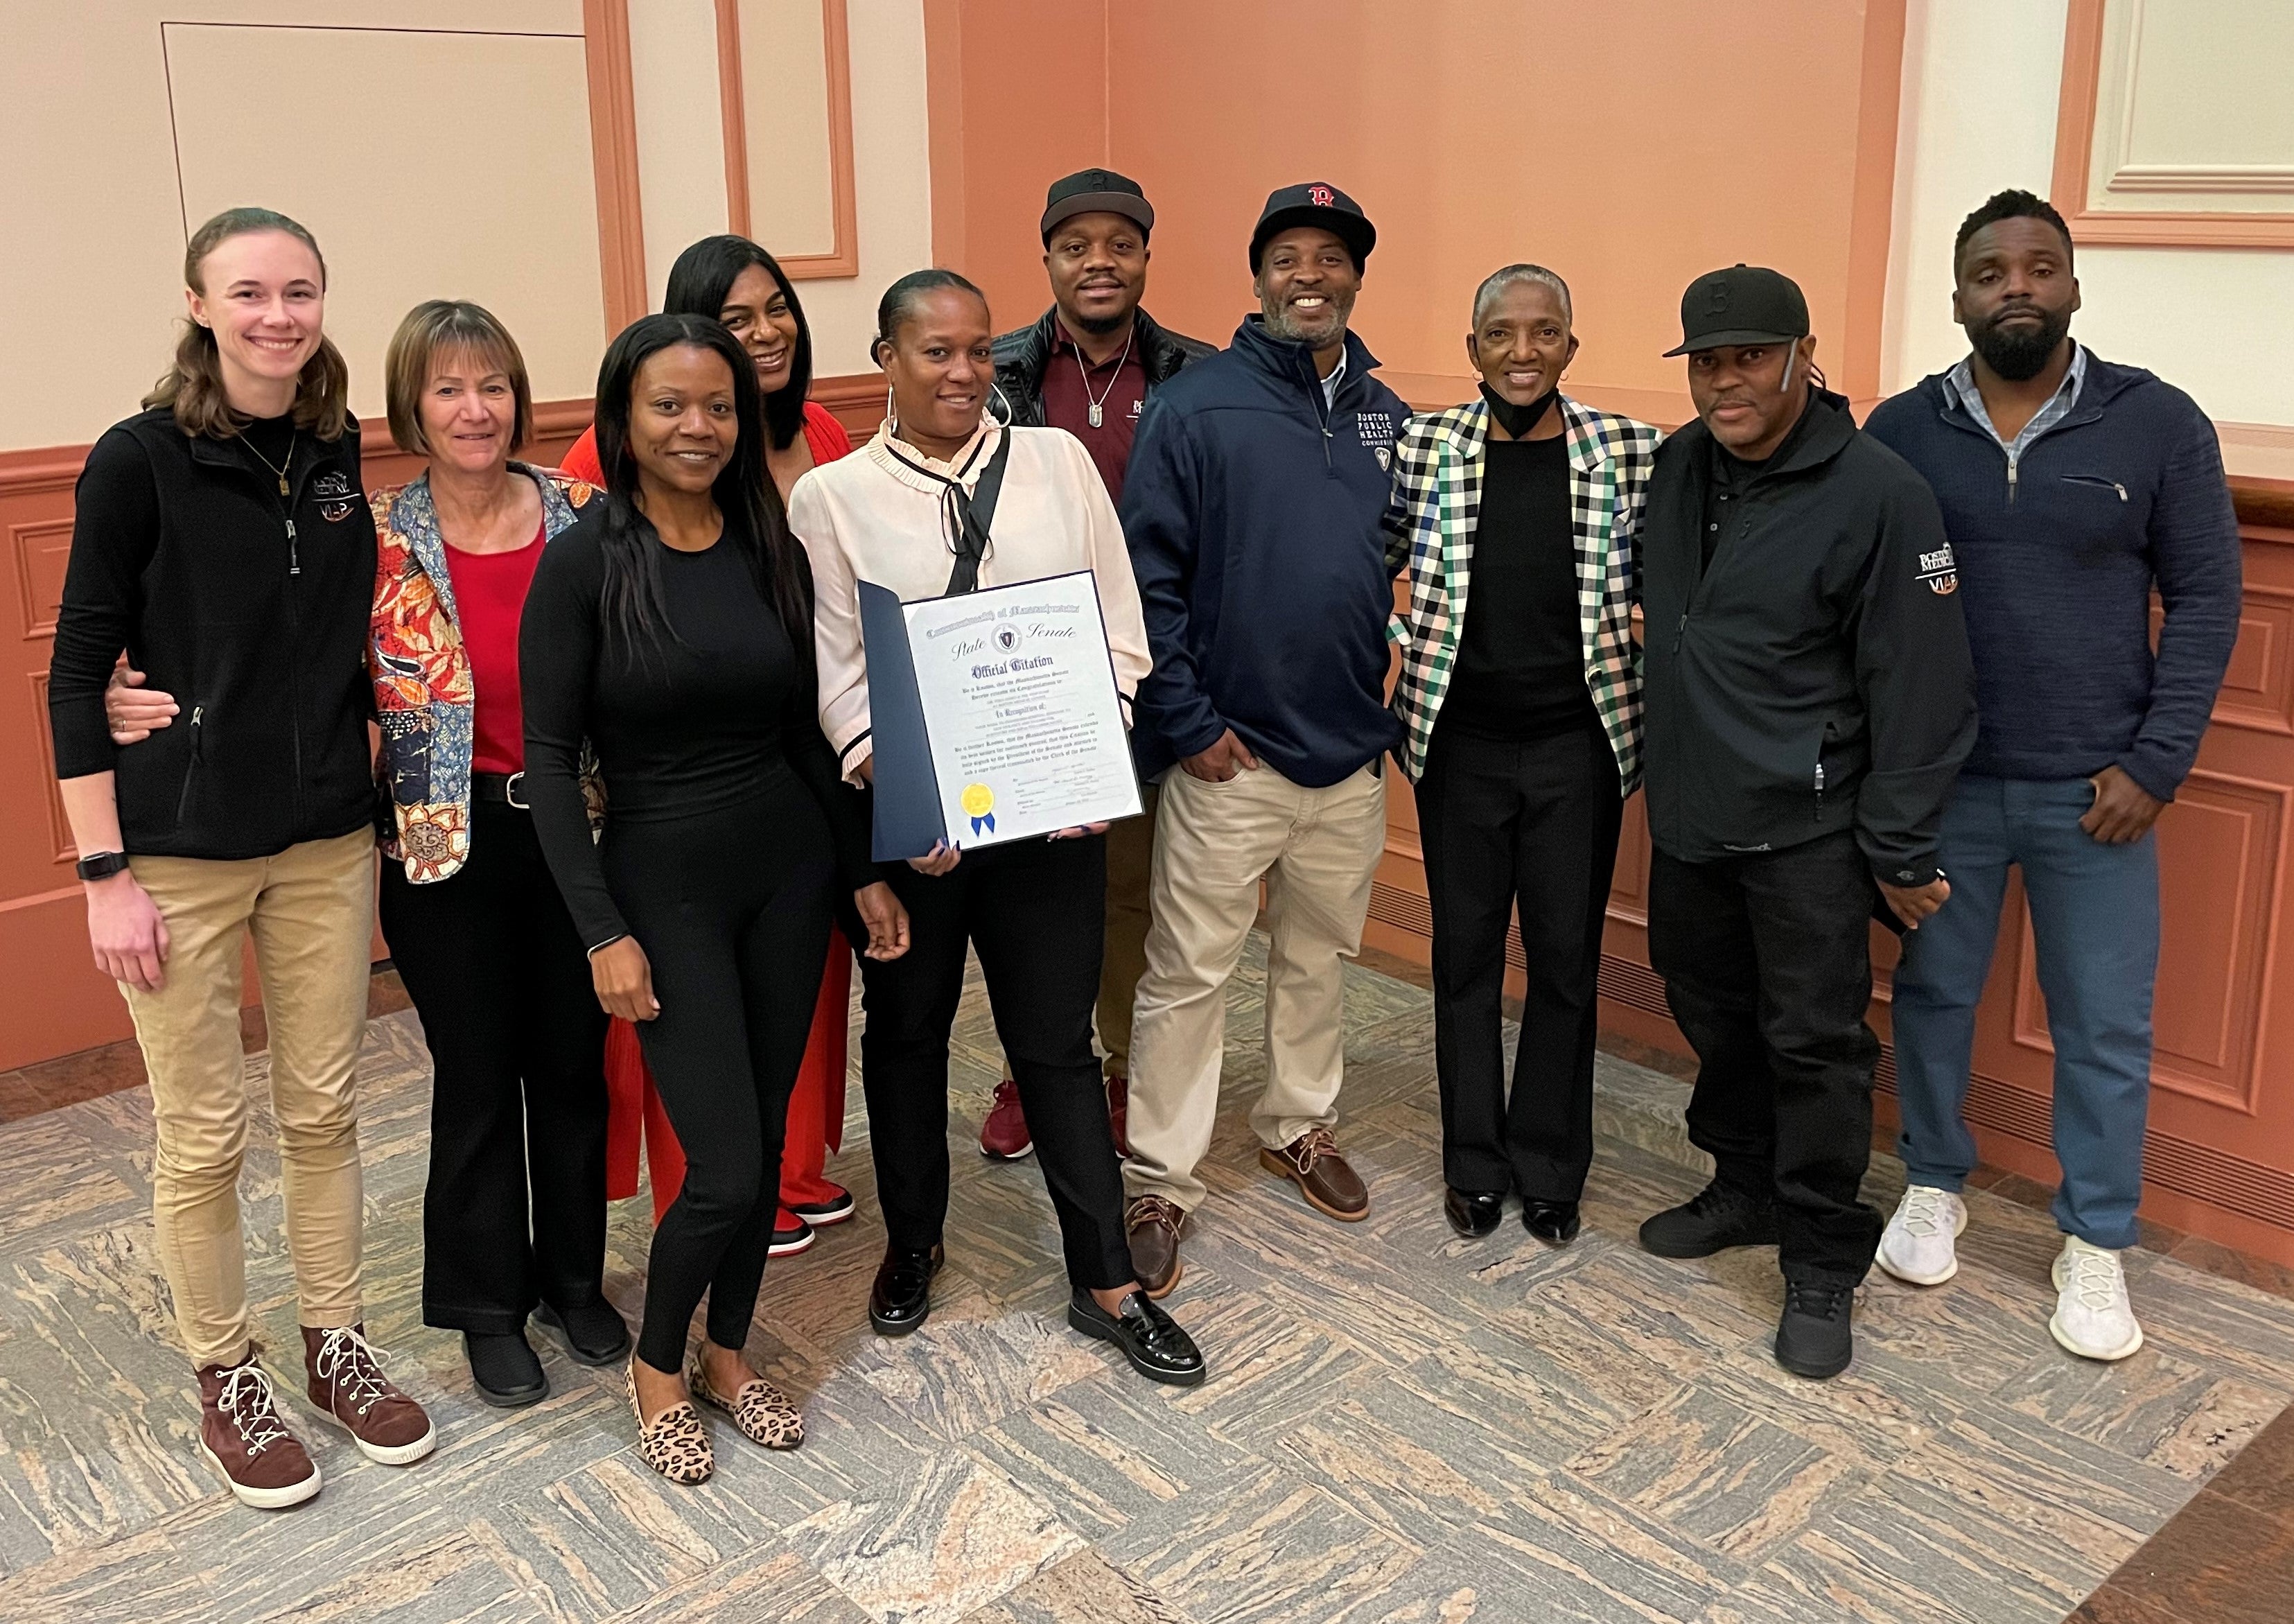 The VIAP Team poses at the MA Coalition to Prevent Gun Violence's Peace MVP Award ceremony, at the Cathedral Church of St. Paul, holding an Official Citation from the State Senate.